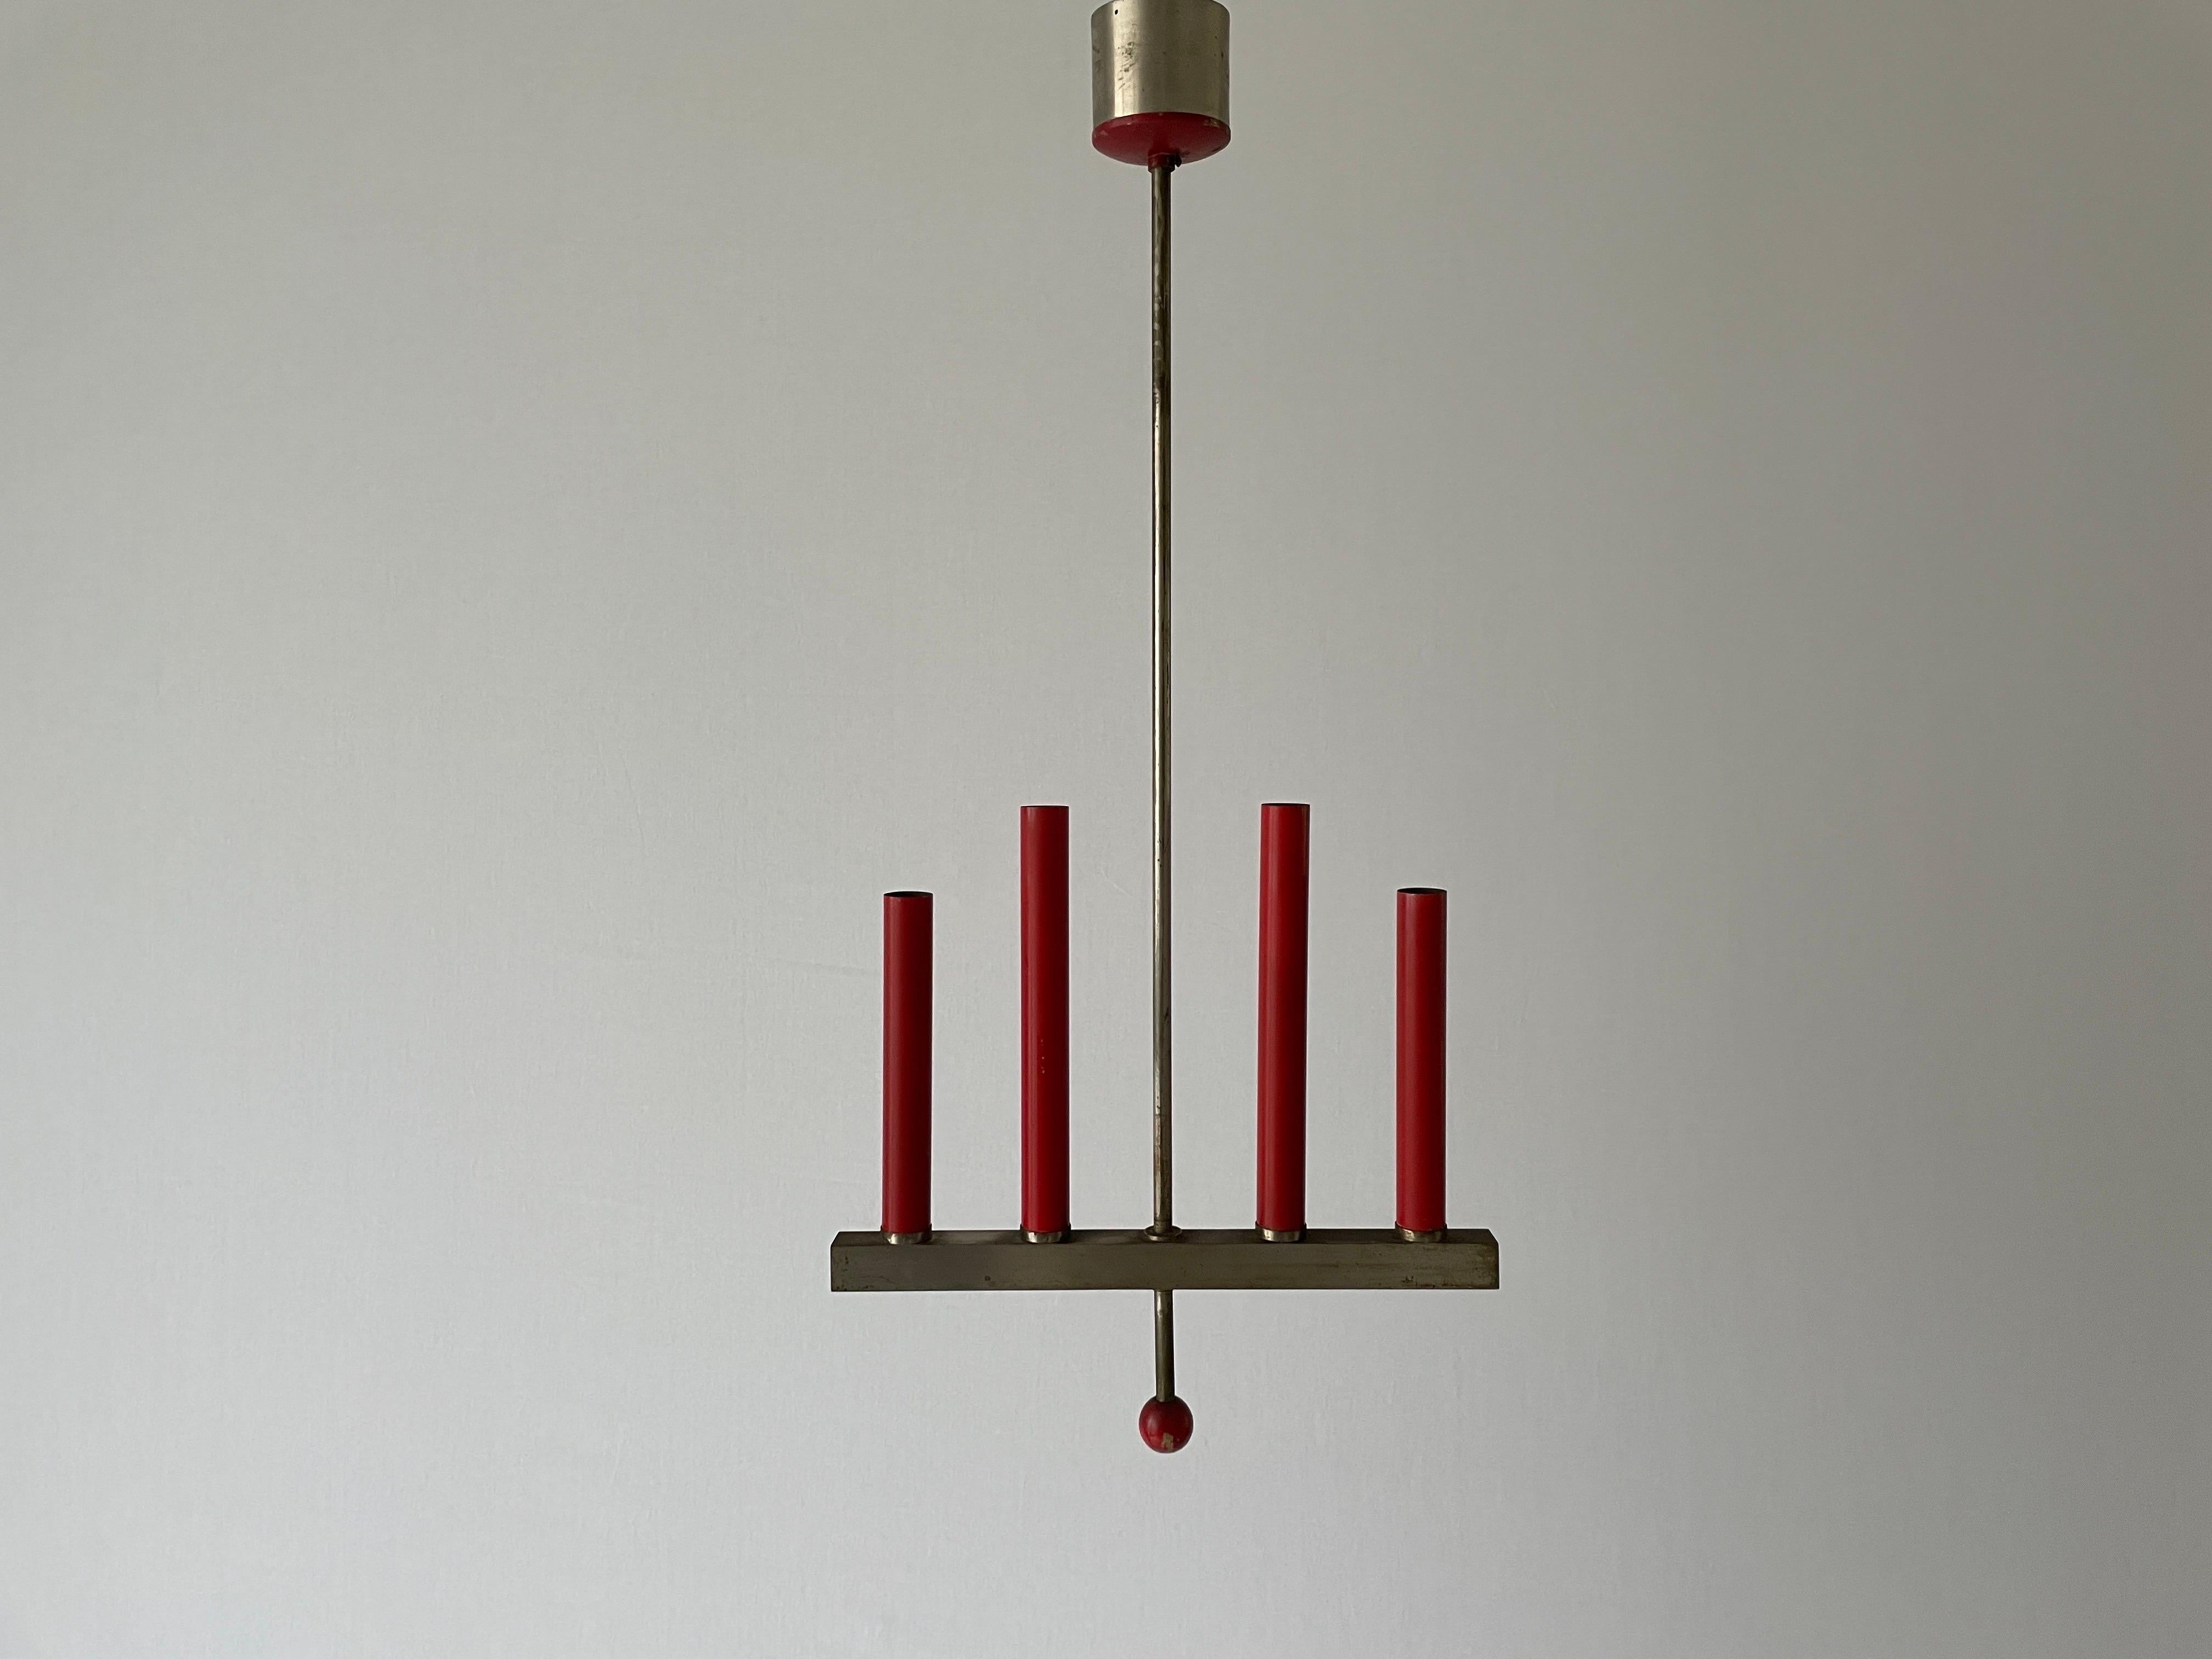 Red Metal 4 Tubes Ceiling Lamp, 1960s, Italy

This lamp works with 4x E14 light bulbs.

Measurements: 
Height: 75 cm
Shade height, width and depth: 35cm , 36 cm and 3 cm

